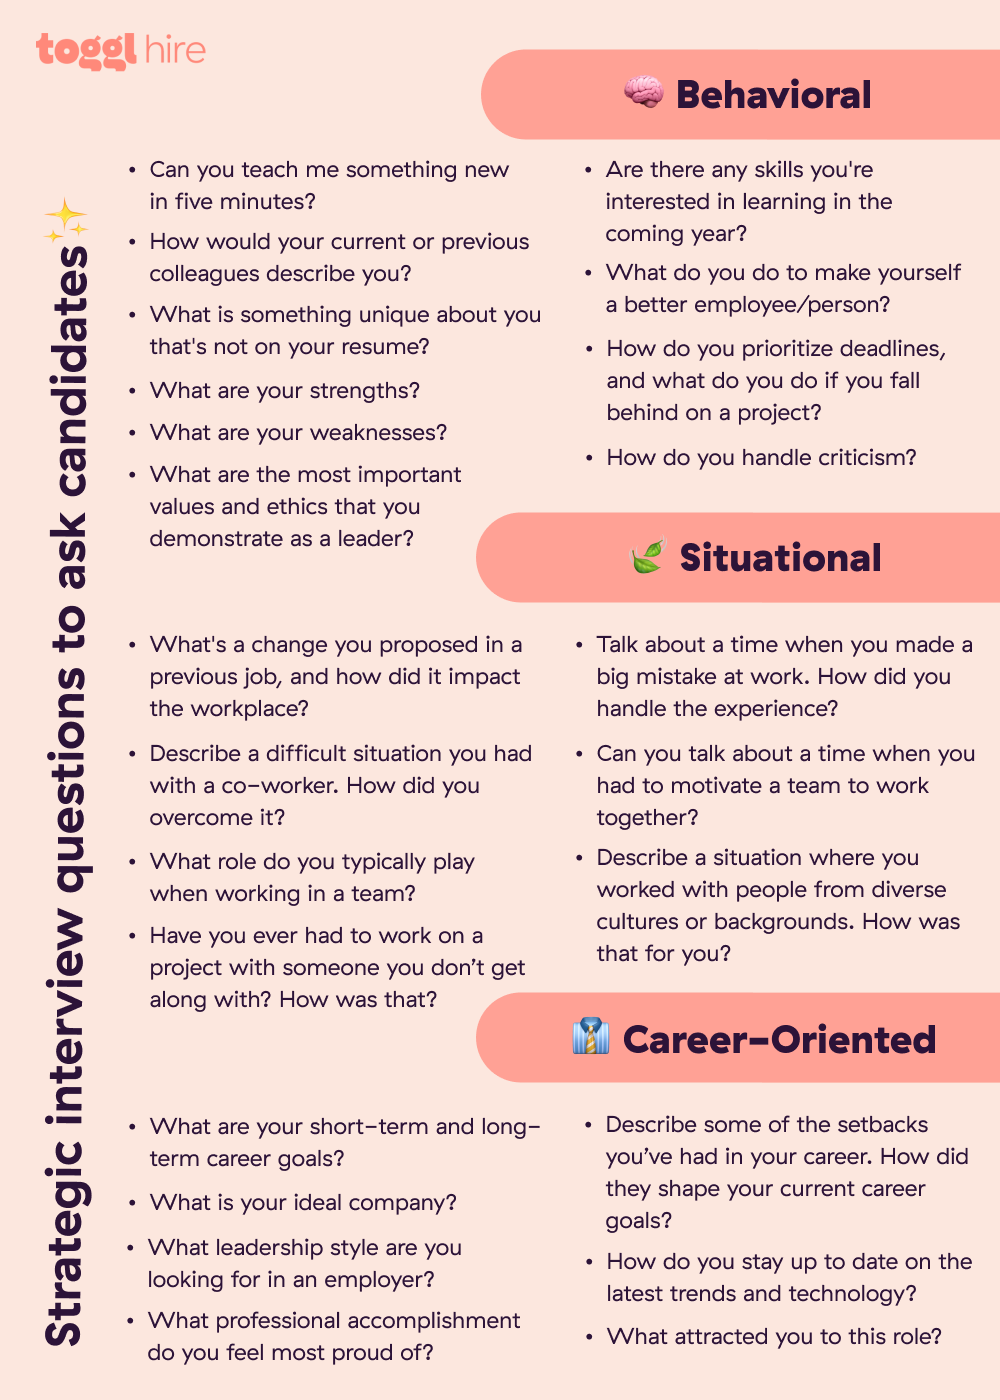 Download this list of strategic interview questions to ask and use it during interviews.